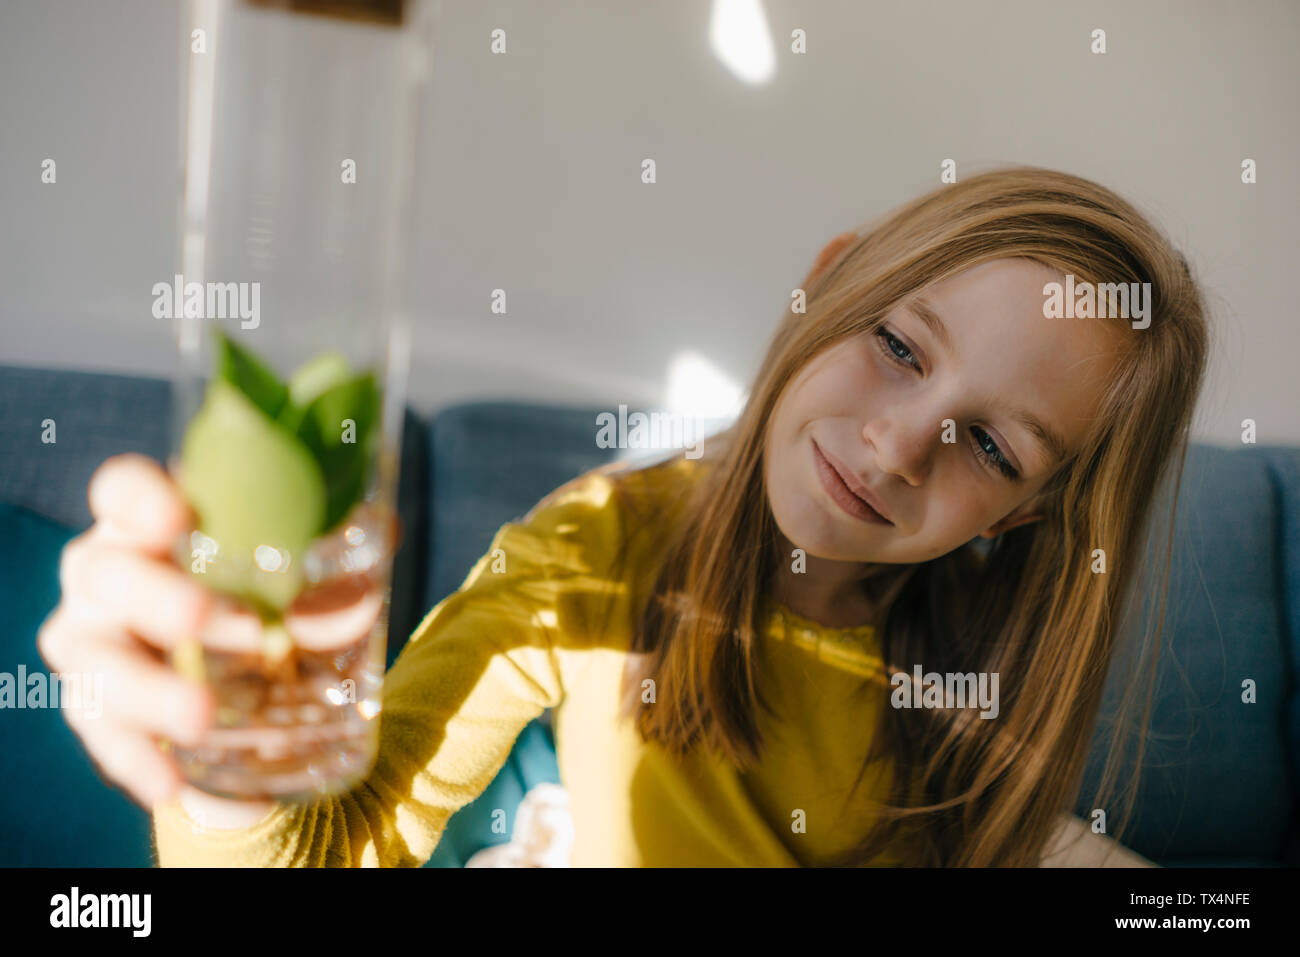 Girl at home looking at plant in a glass Stock Photo